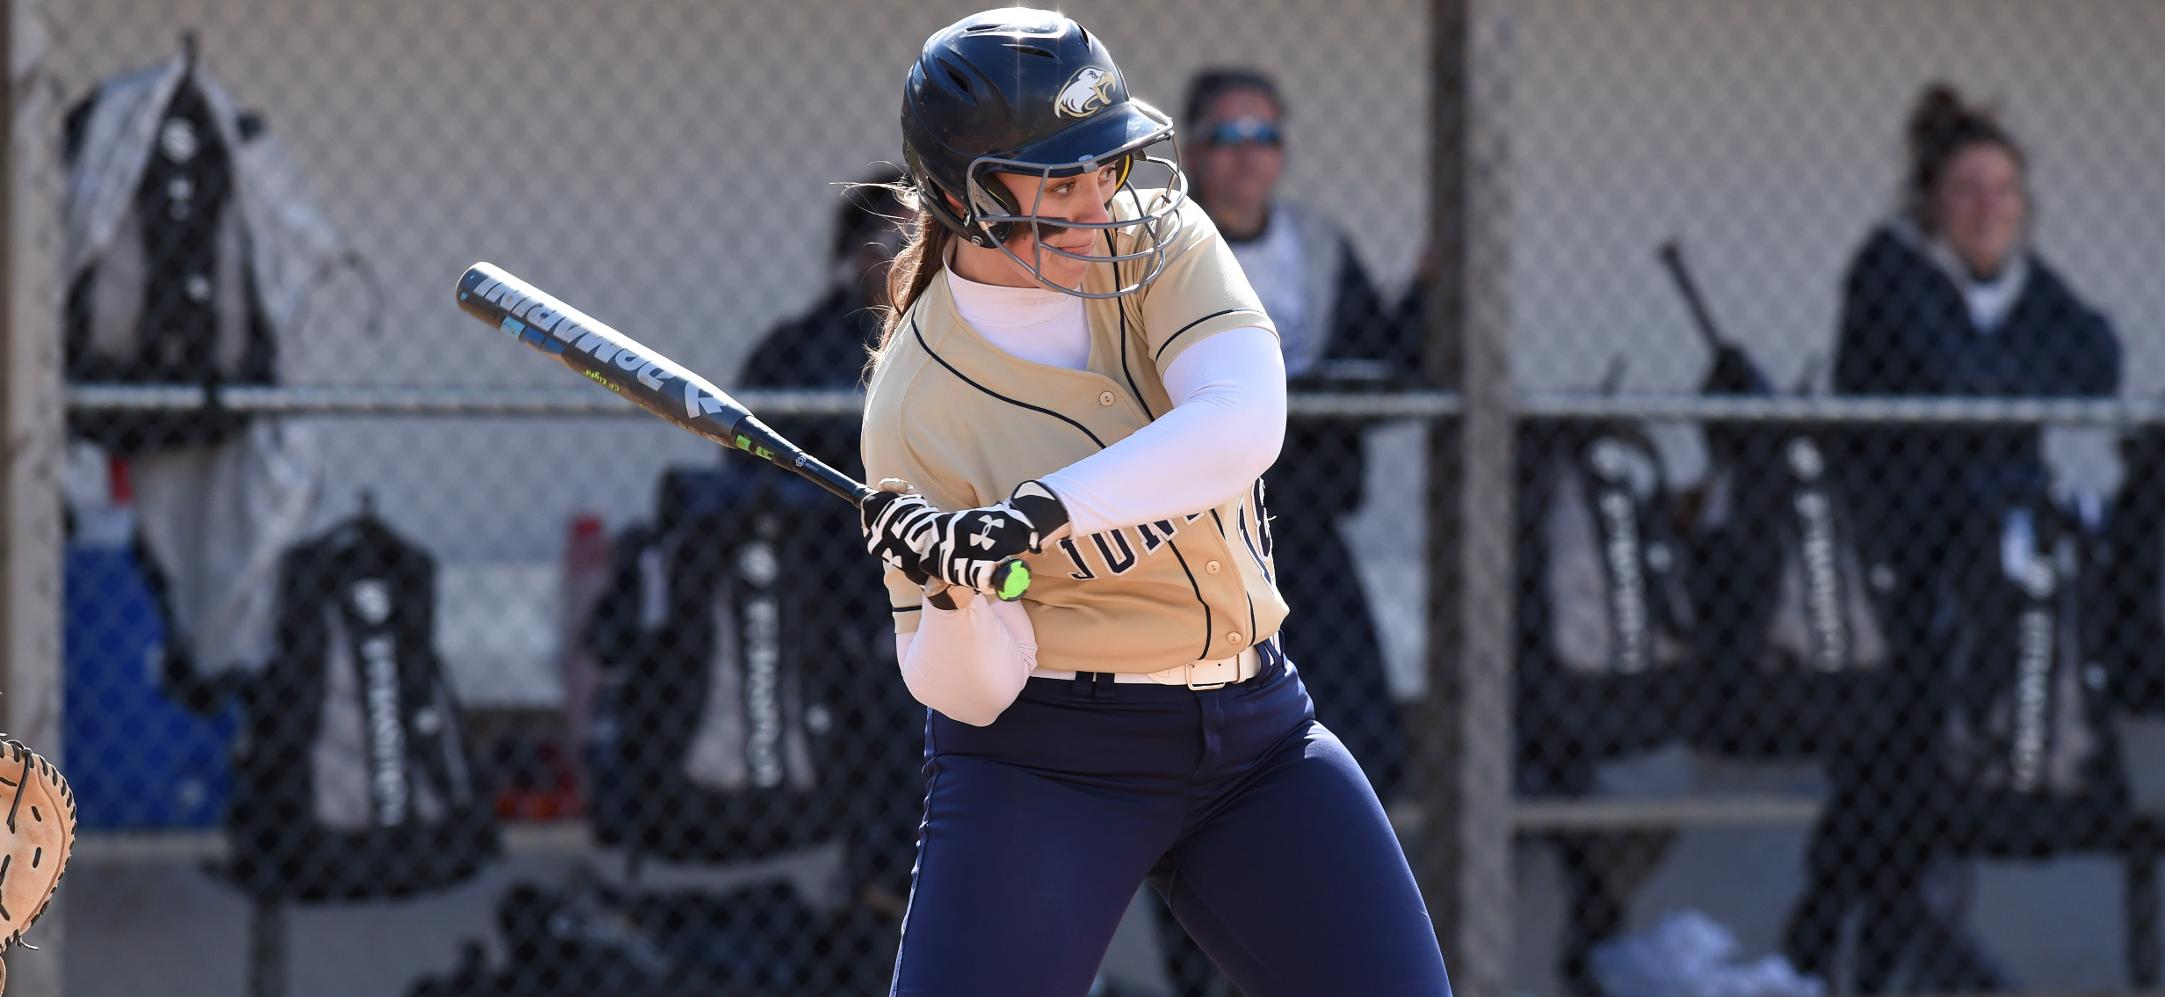 Lindsey Kosicki was 2-for-4 on the afternoon with three runs scored and four runs batted in.